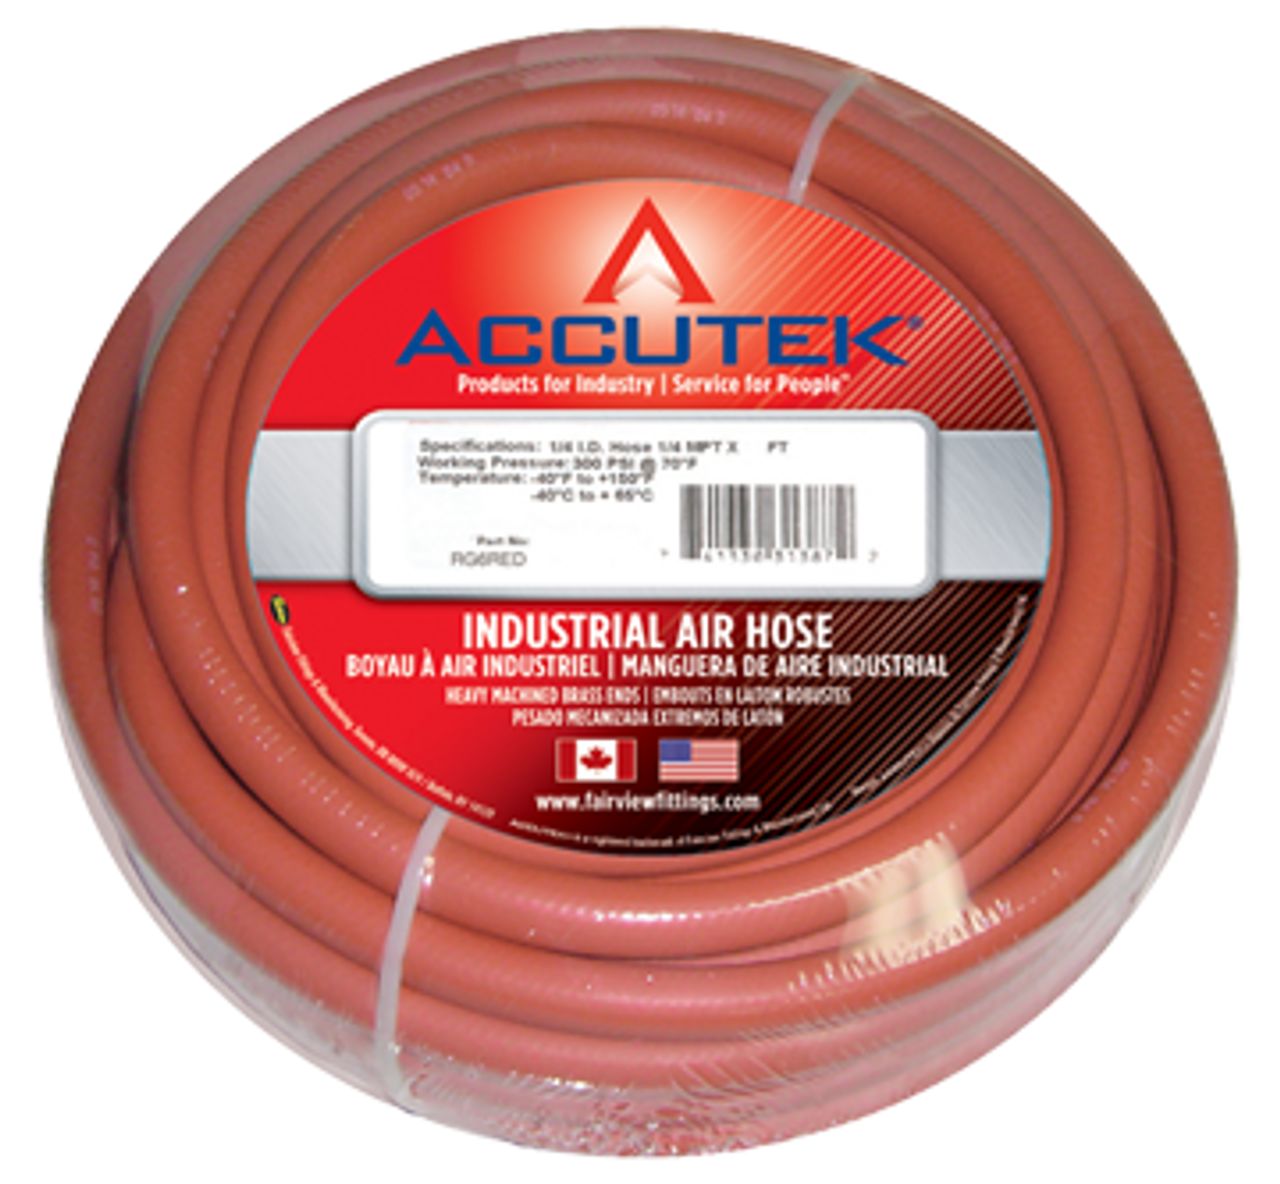 3/8 x 3/8" x 100' Red EPDM 250 PSI Rubber Air Hose Assembly - Brass Male NPT Ends  RG6/2RED-100C